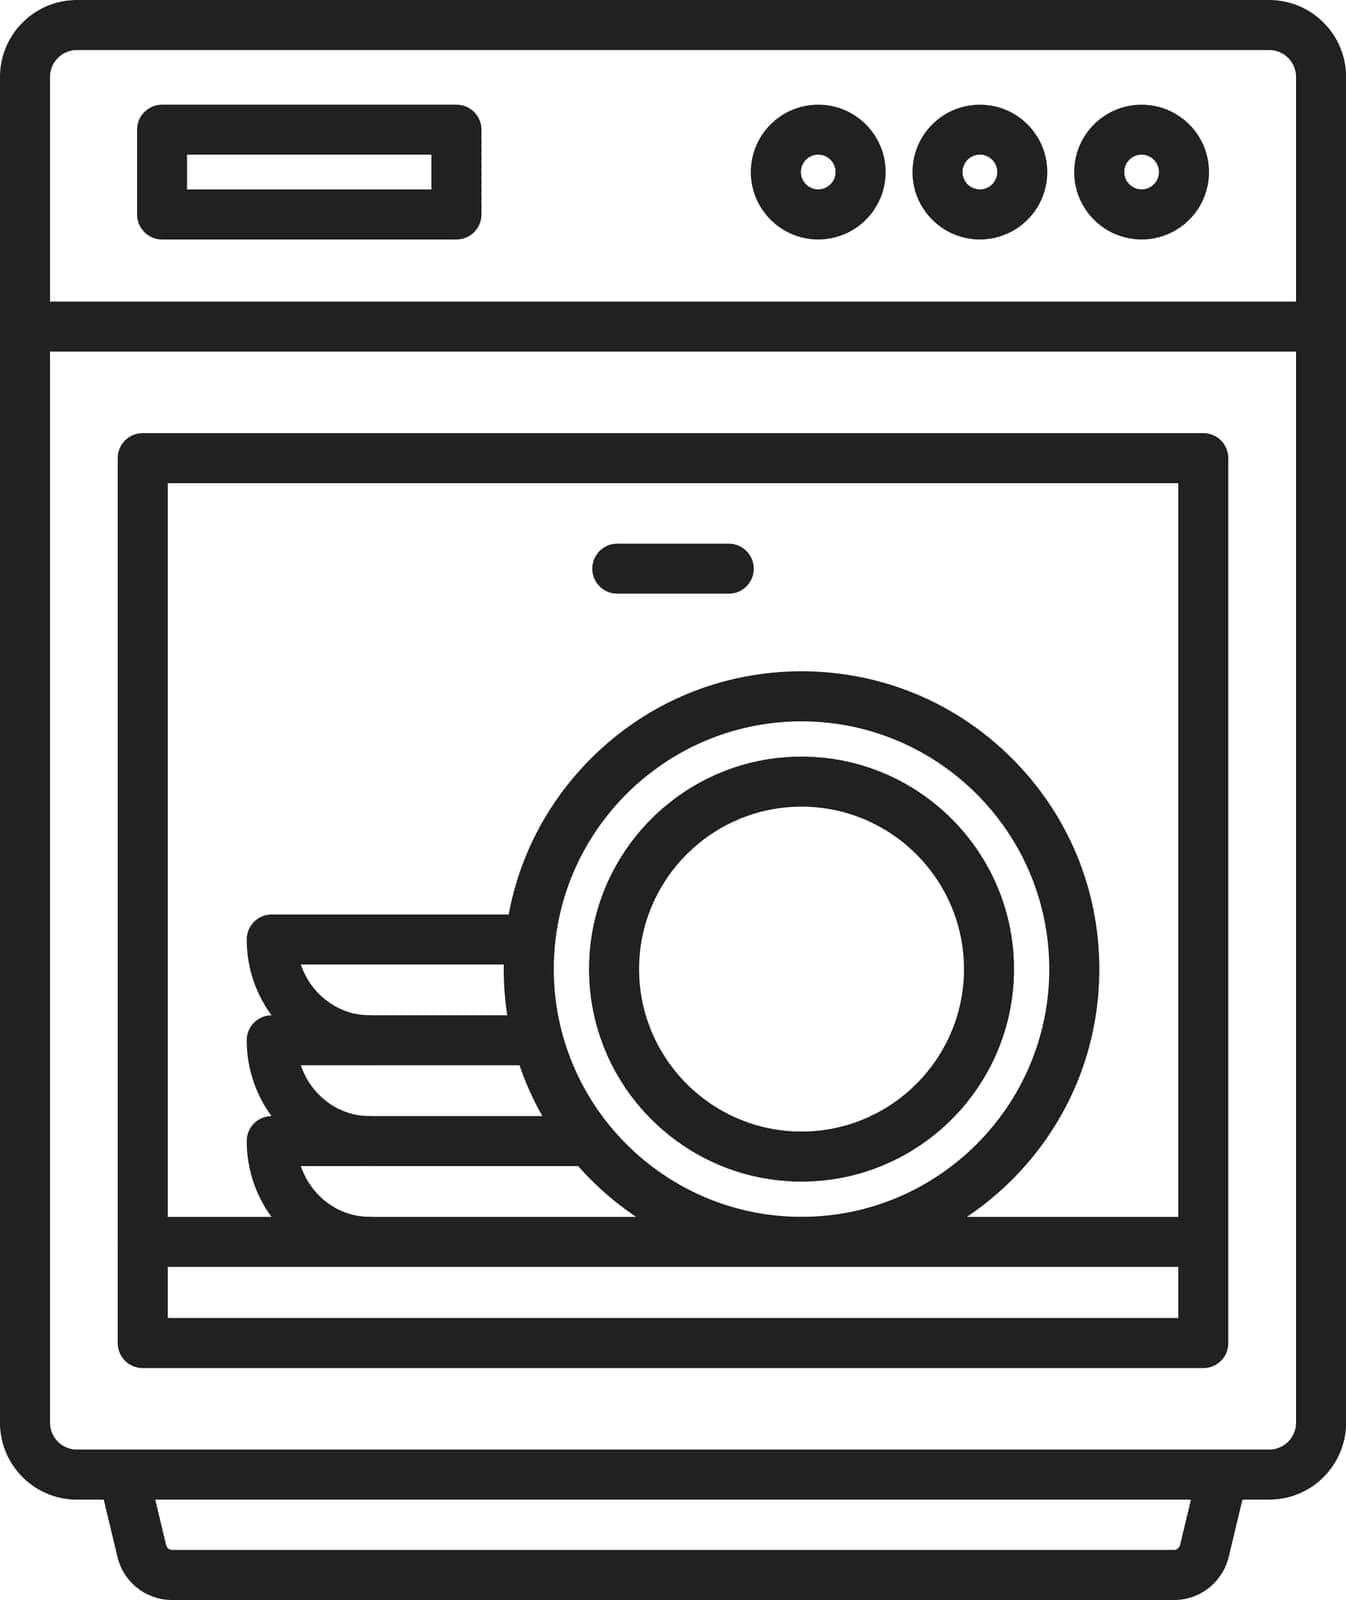 Dish Washer Icon image. Suitable for mobile application.